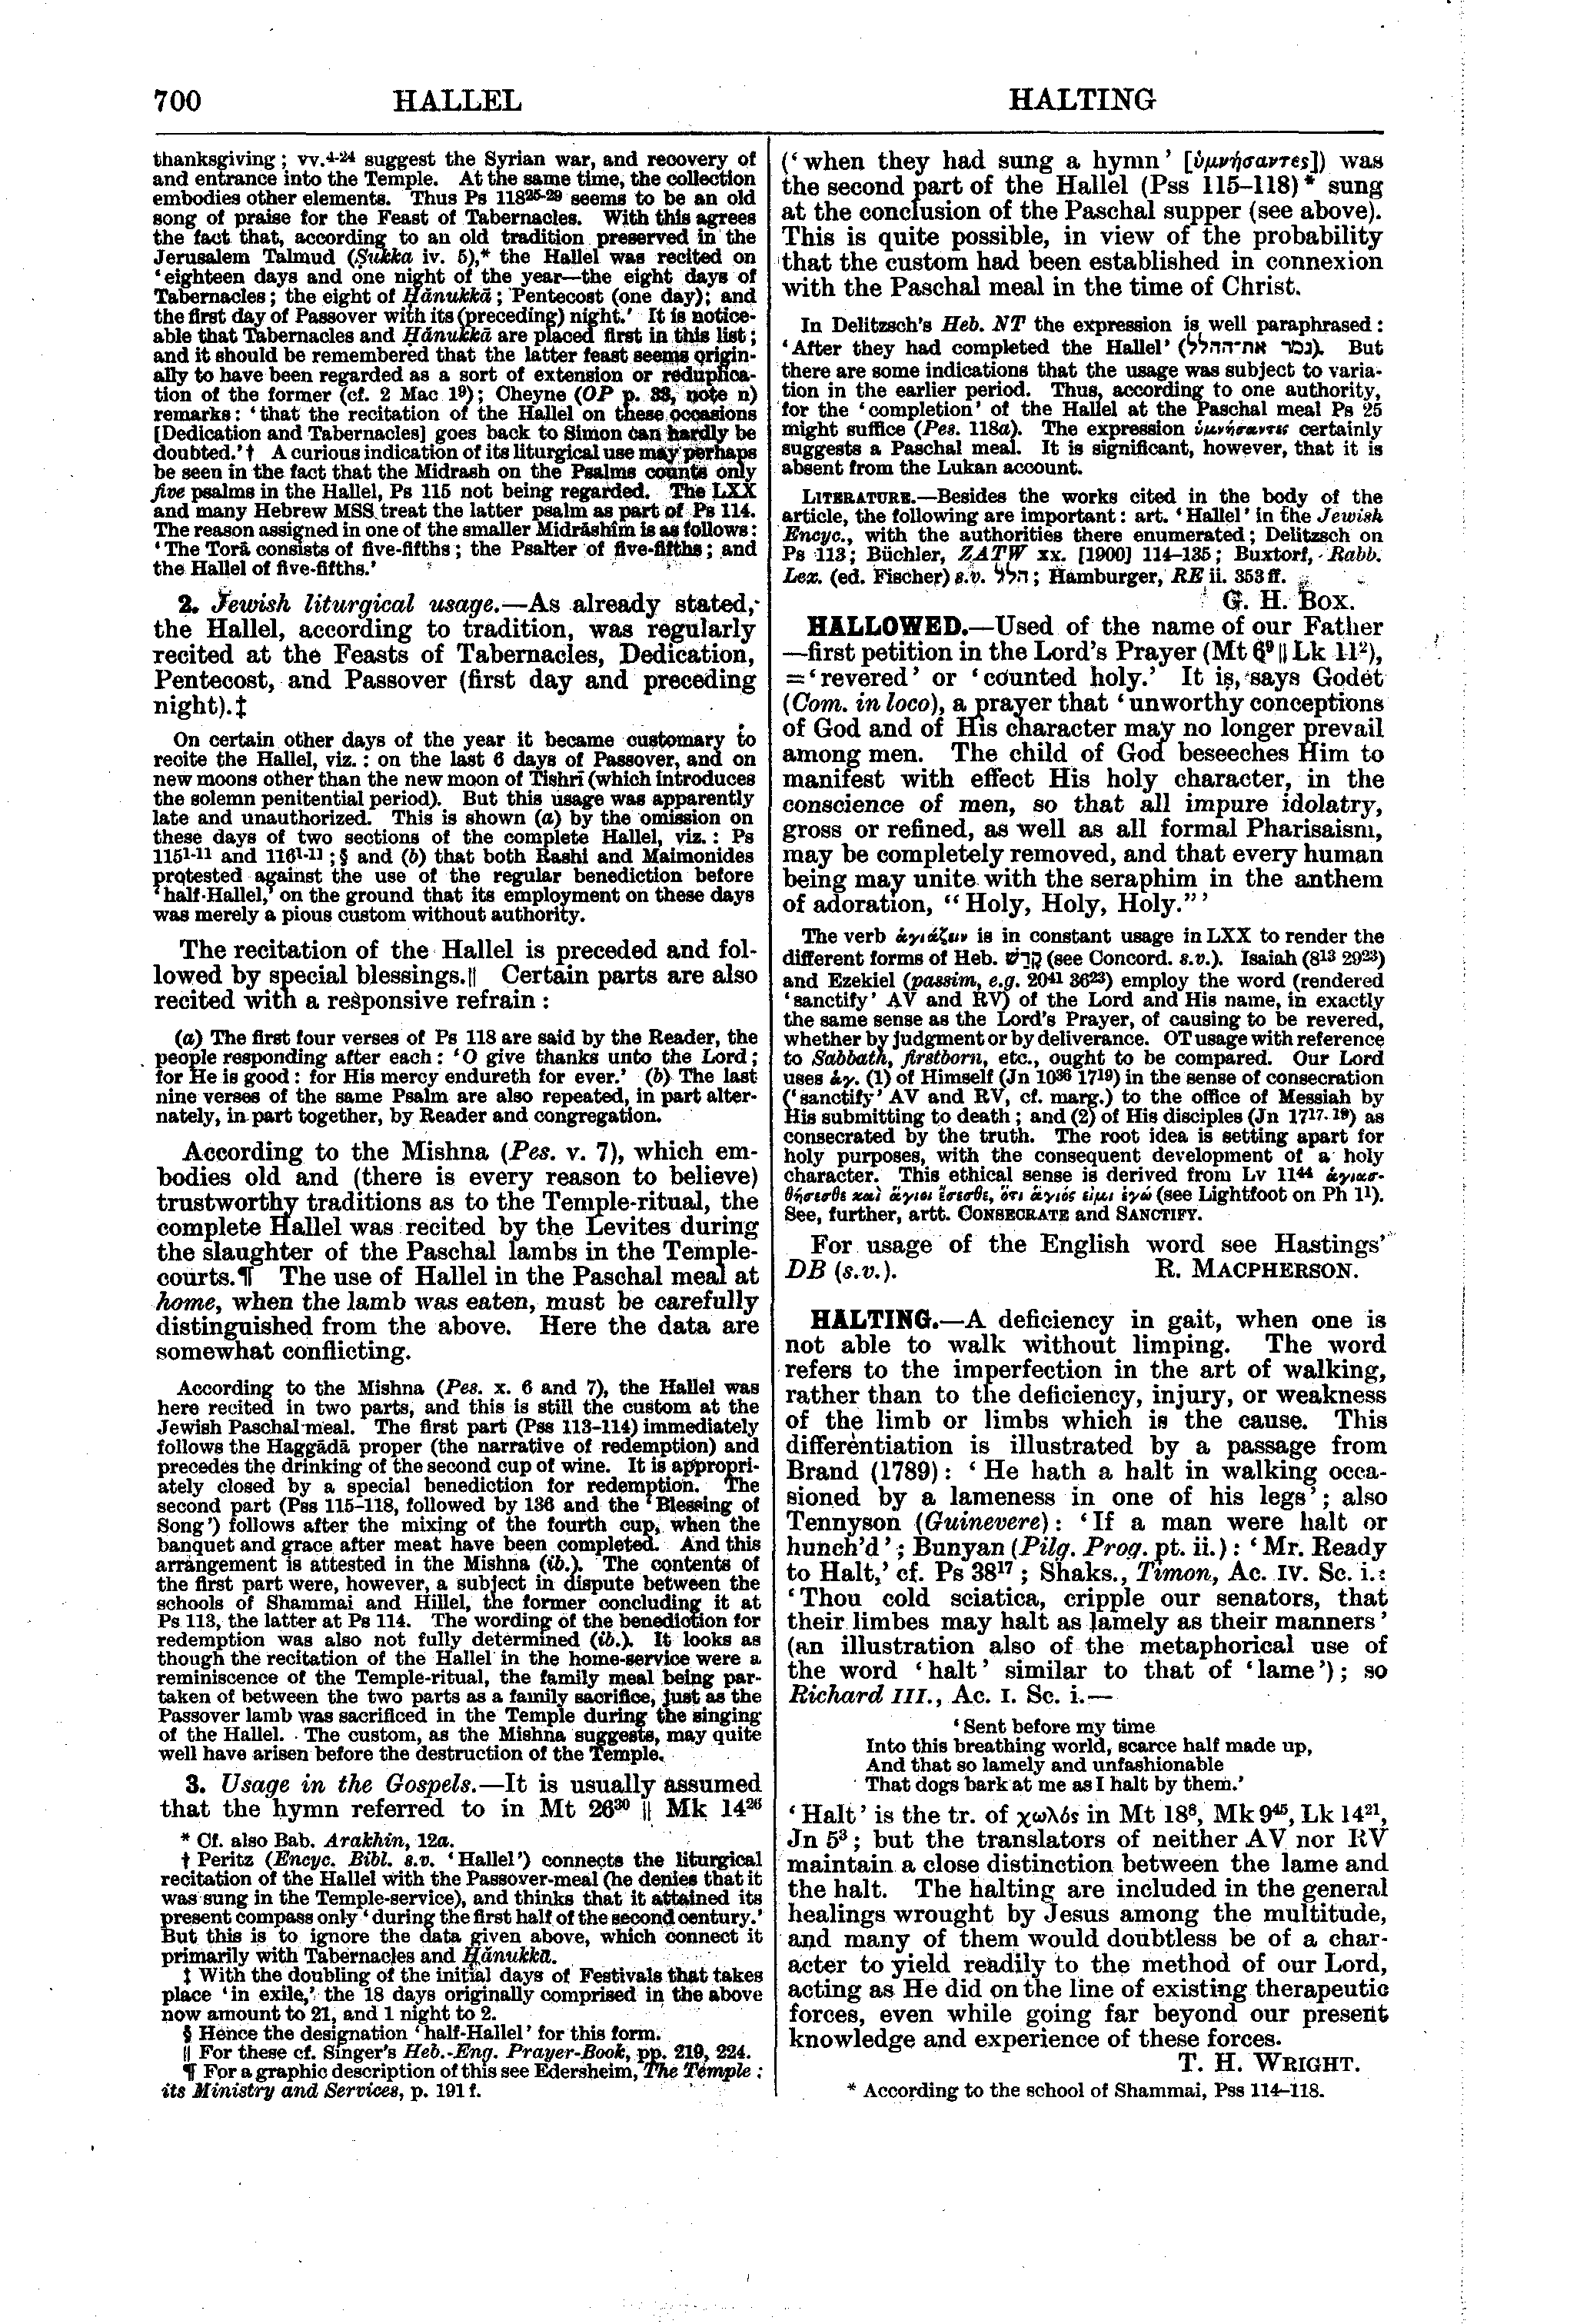 Image of page 700